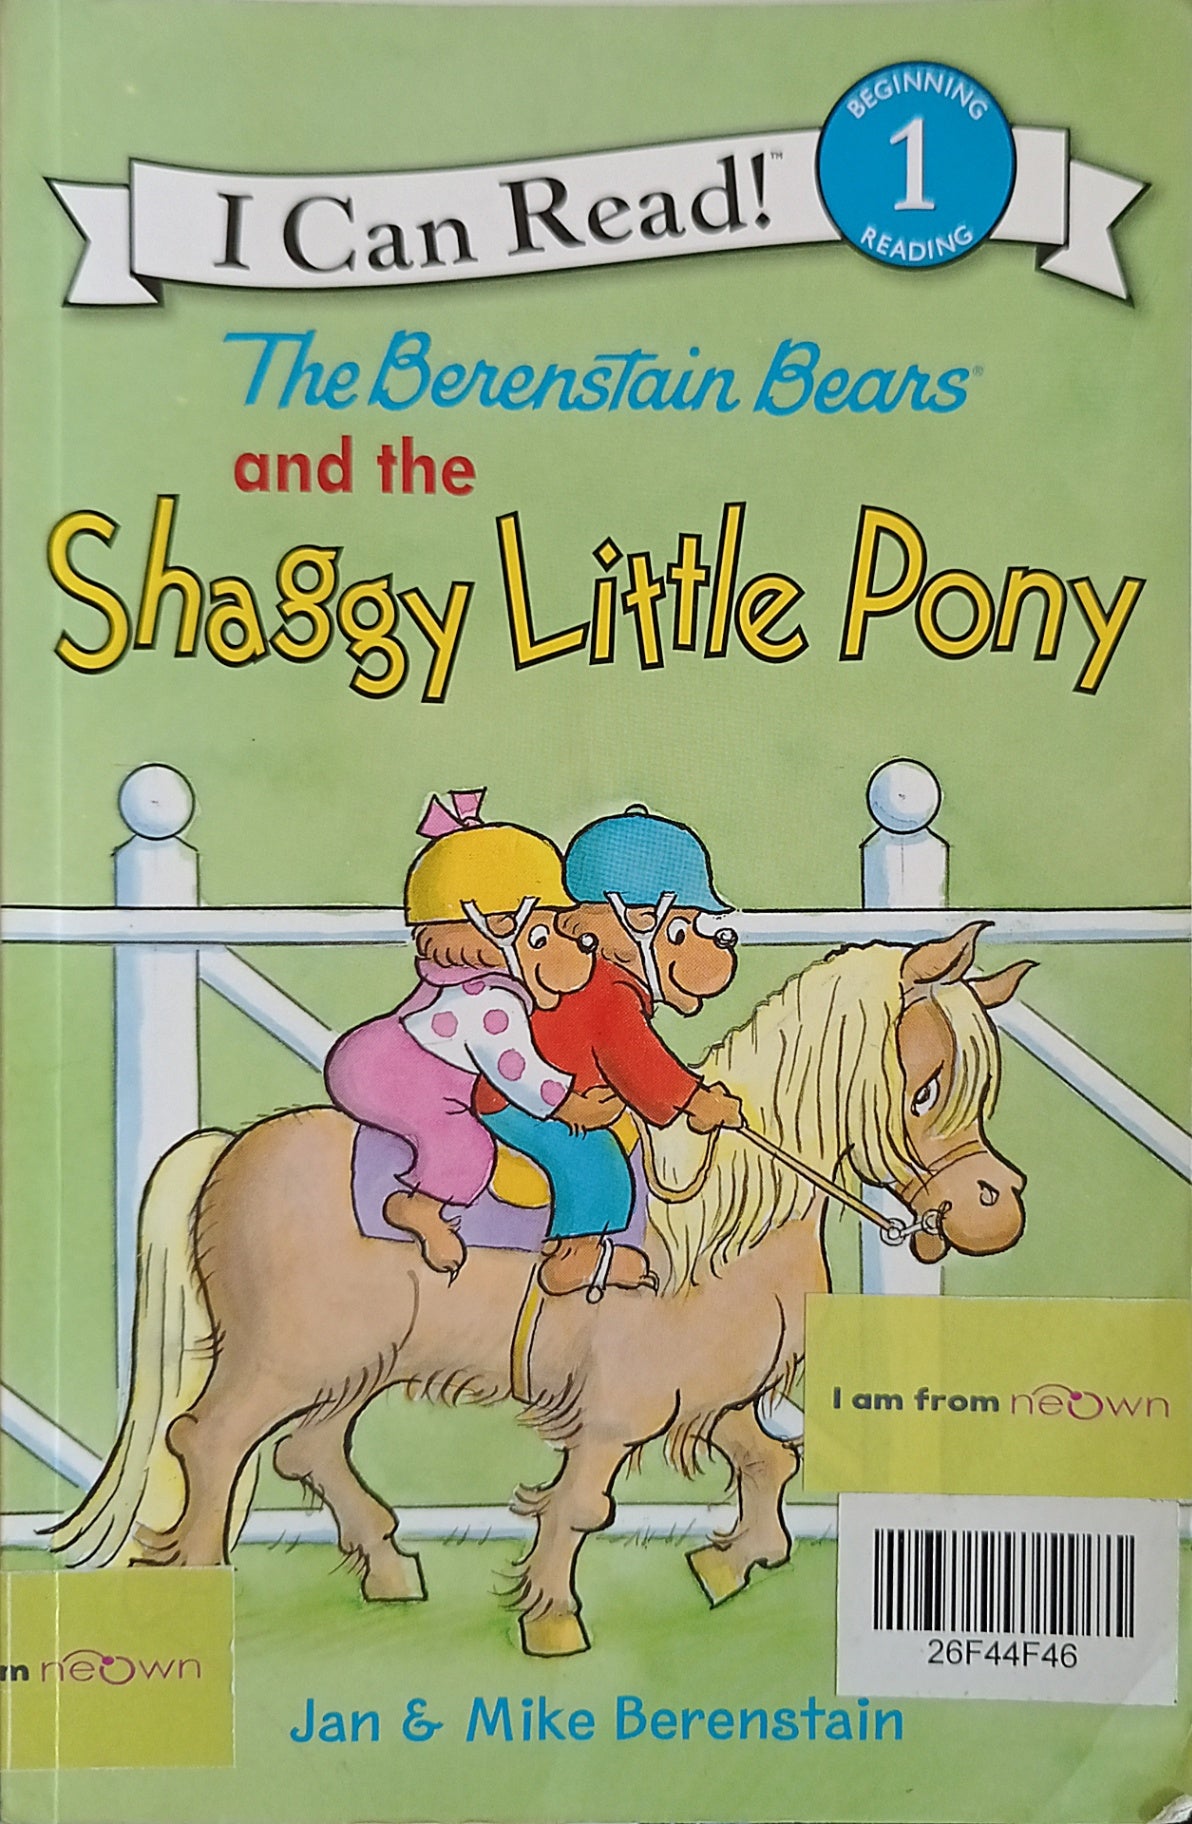 I Can Read The Berenstain Bears and the Shaggy Little Pony